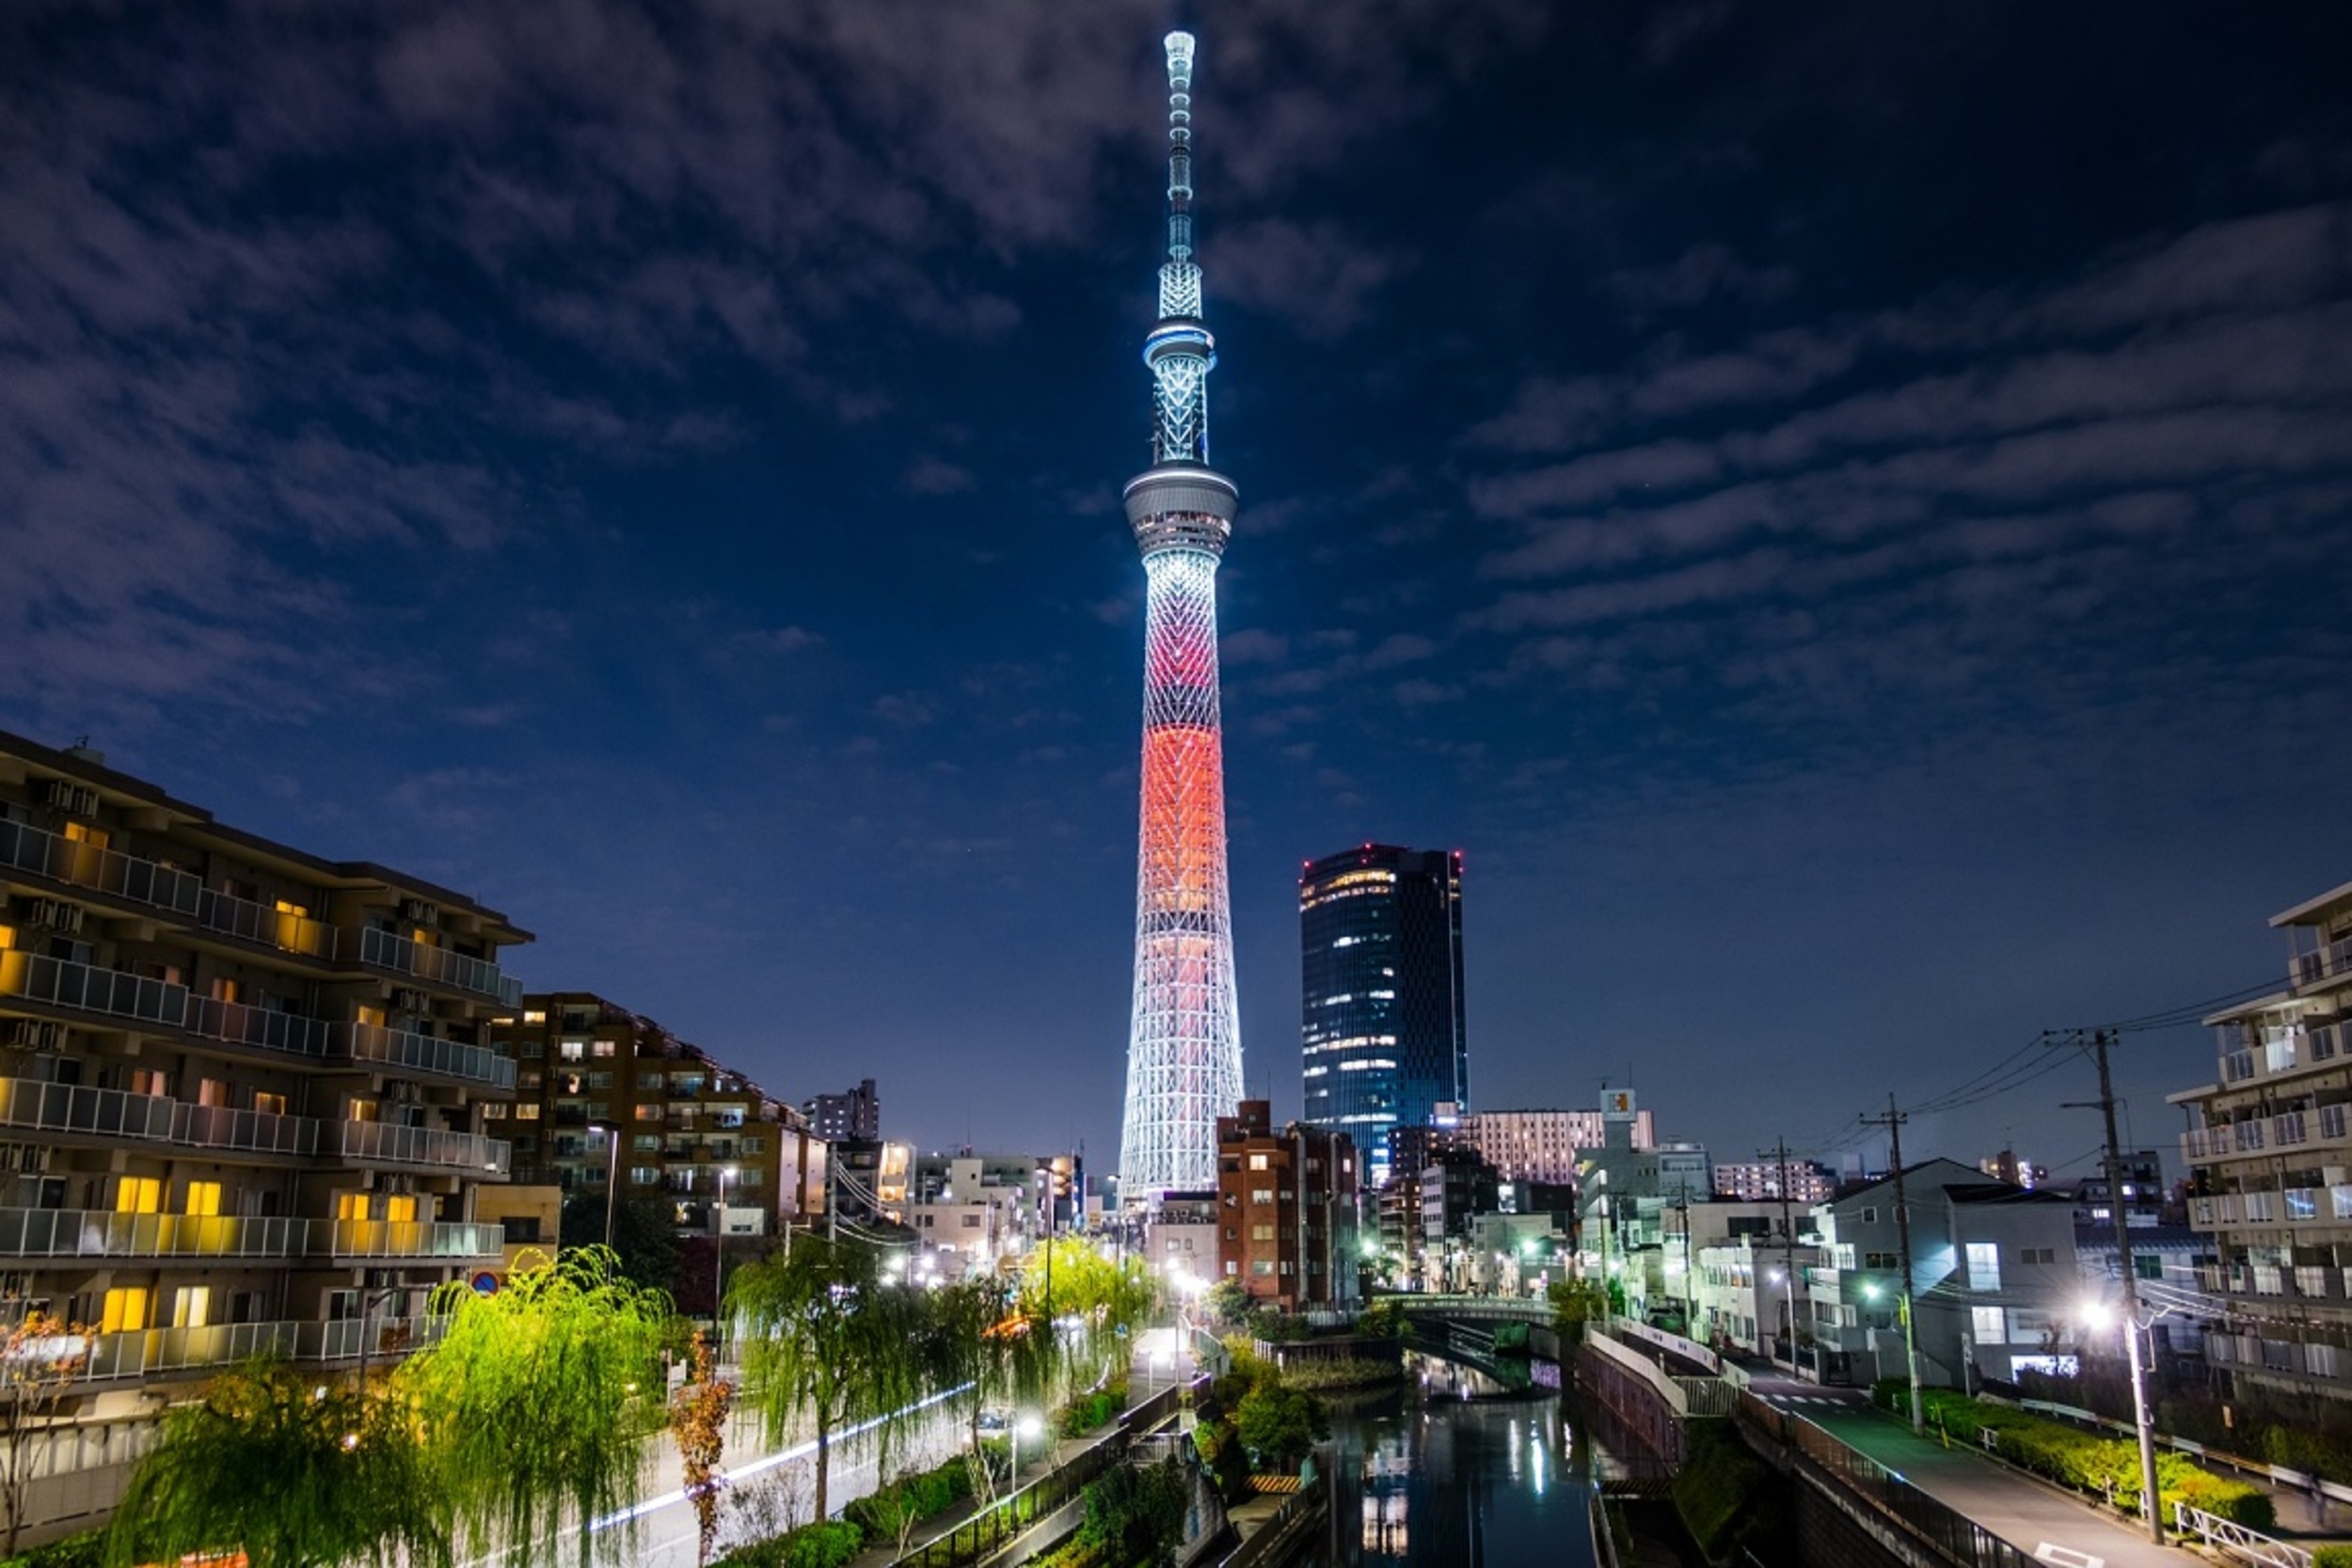 <p>The electric bill has got to be through the roof. At night, the 2,080-foot tower puts on a perpetual light show, lighting up the sky with neon colors that dazzle nearby pedestrians. You can pay to go inside, but the real view is of the monument itself.</p><p><a href='https://www.msn.com/en-us/community/channel/vid-cj9pqbr0vn9in2b6ddcd8sfgpfq6x6utp44fssrv6mc2gtybw0us'>Follow us on MSN to see more of our exclusive lifestyle content.</a></p>